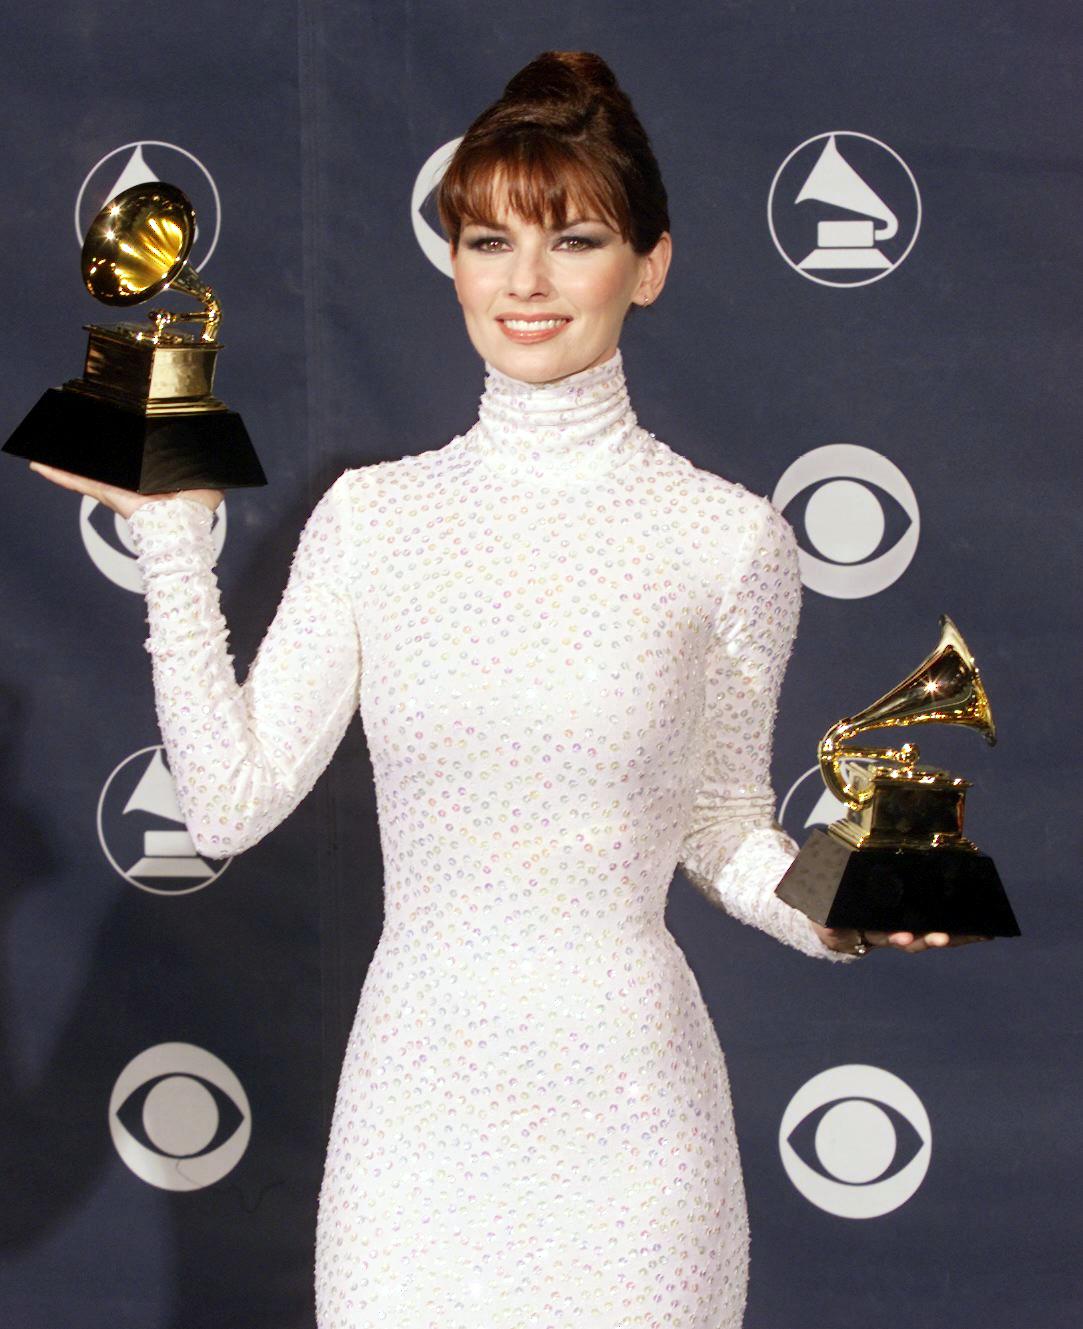 Shania Twain holding two Grammy Awards for Best Country Song and Best Female Country Vocal in LA, 1999 | Source: Getty Images 